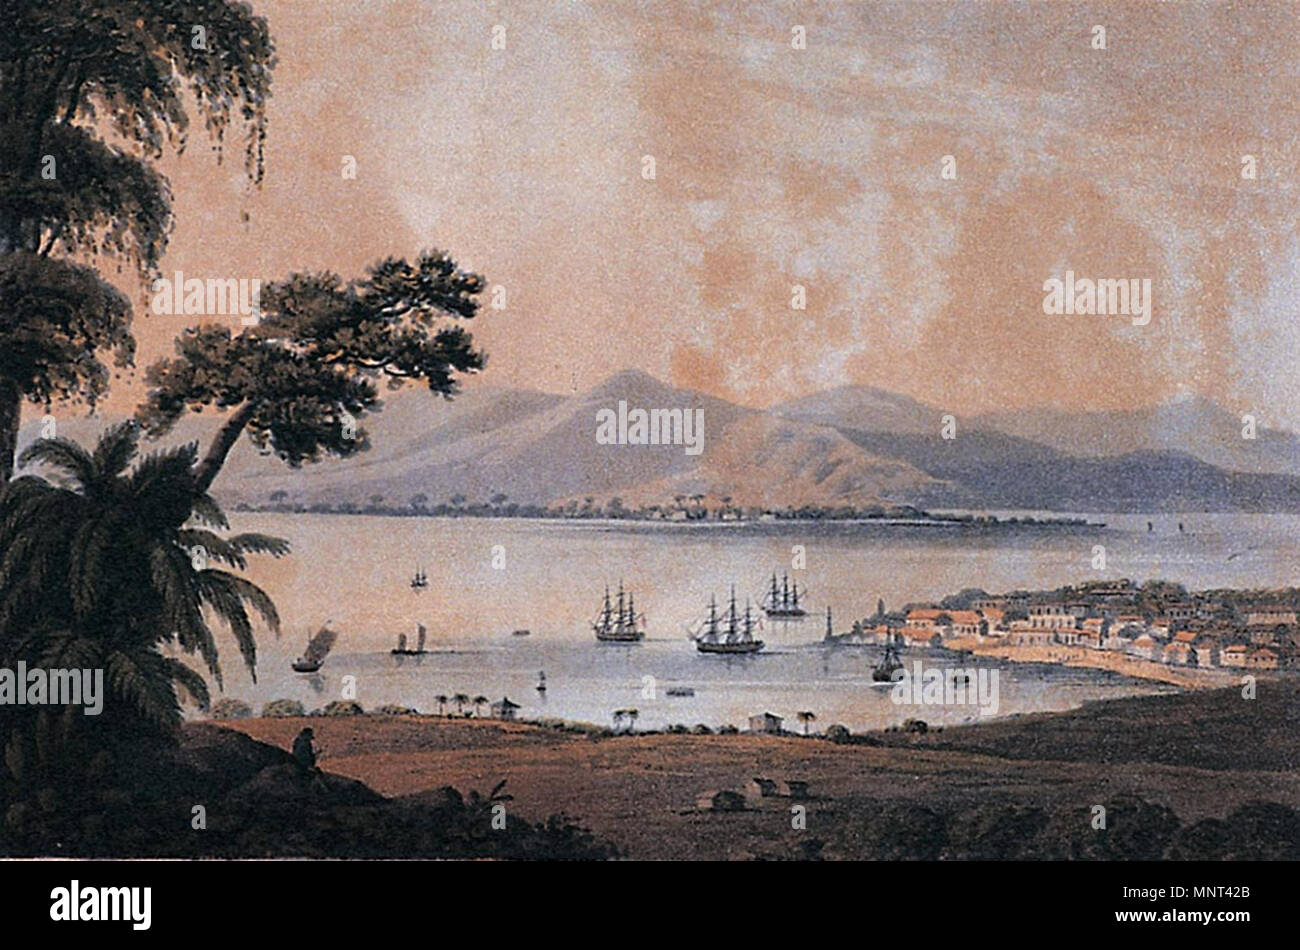 . English: Source: http://www.penangmuseum.gov.my/museum/sites/default/files/portfolio images/N172b.jpg Title: View Overlooking Georgetown Media: Print 1814 Width: 220 mm (8.7 in) Height: 140 mm (5.5 in) Year of creation: 1811 . 1811. Penang State Museum and Art Gallery 972 Penang Museum historical painting N172b Stock Photo